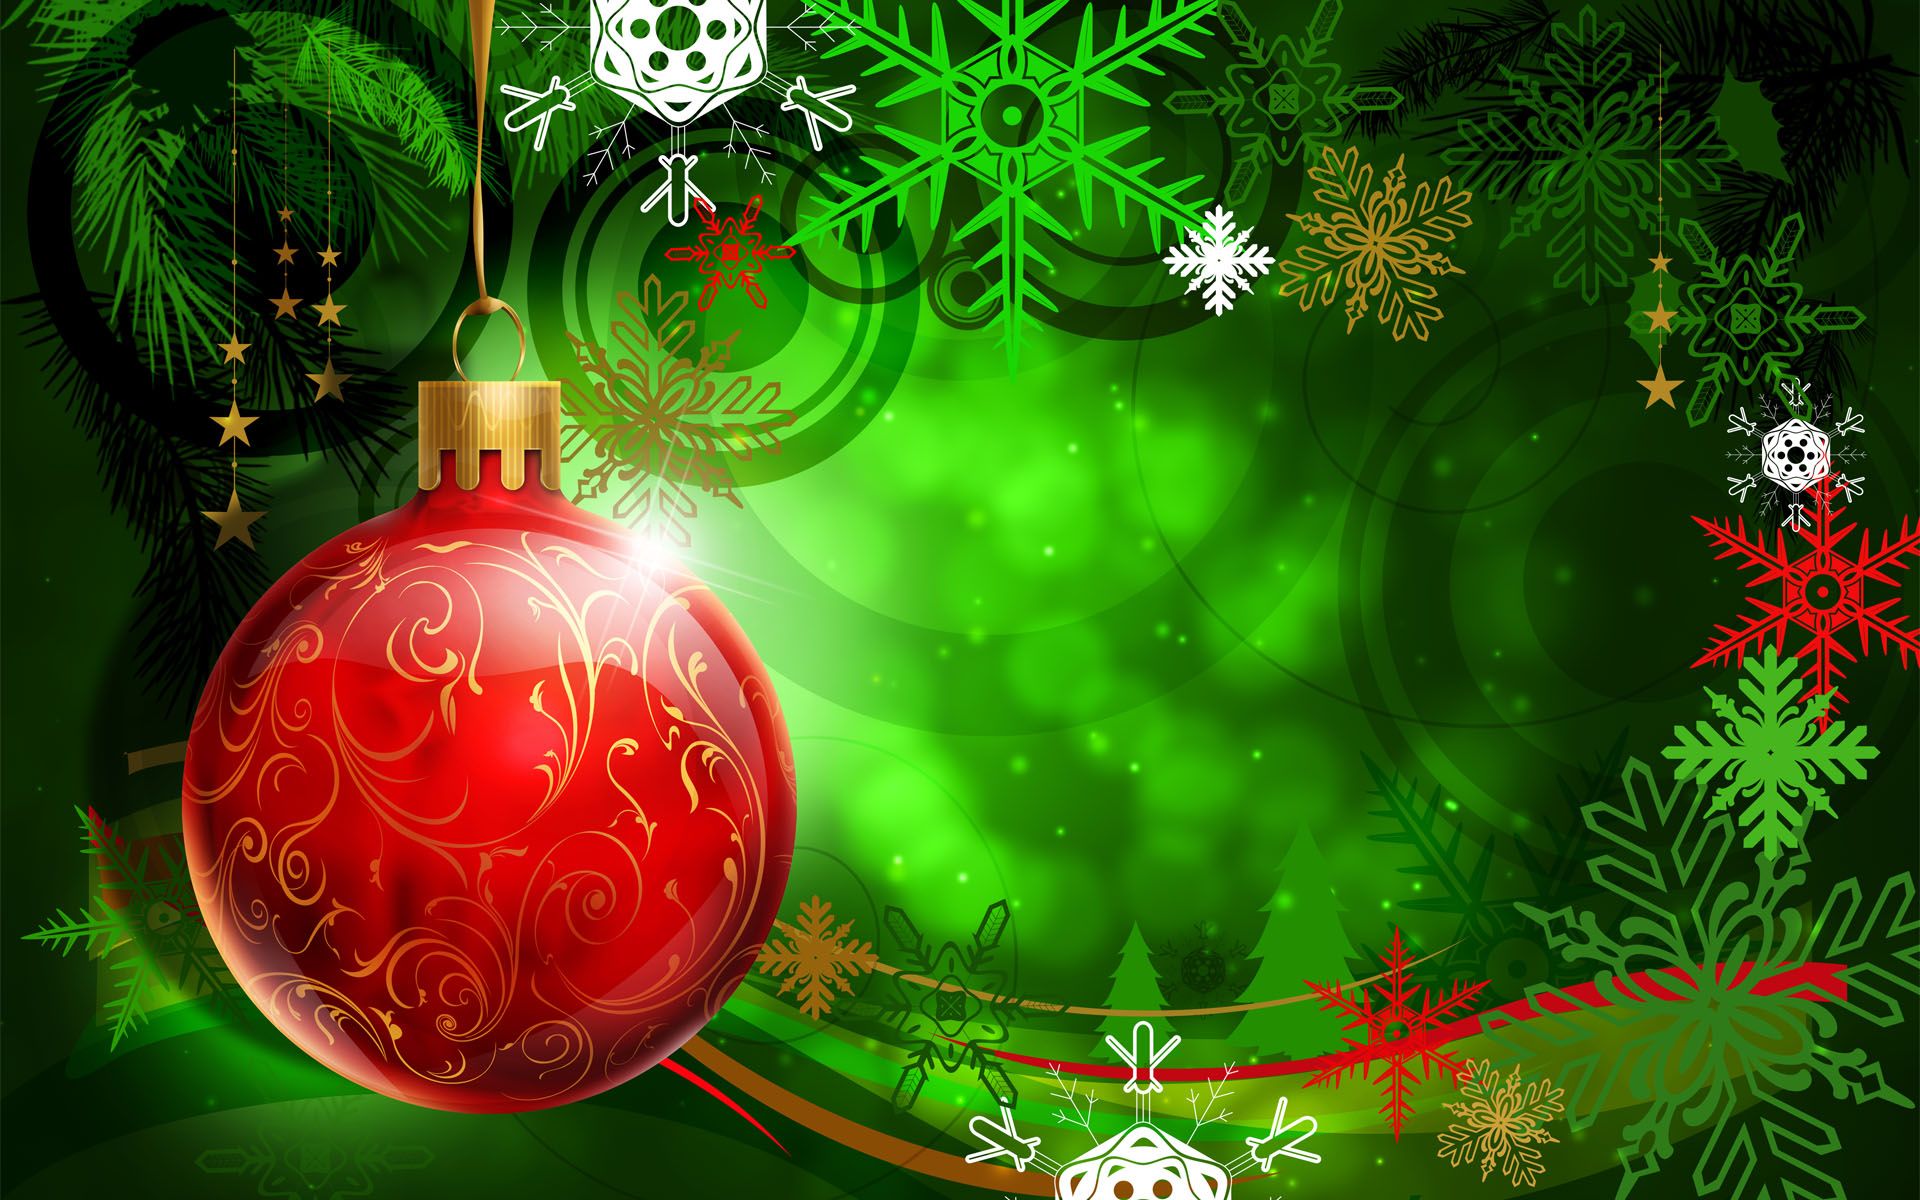 Christmas Wallpaper Backgrounds - HD Wallpapers Backgrounds of